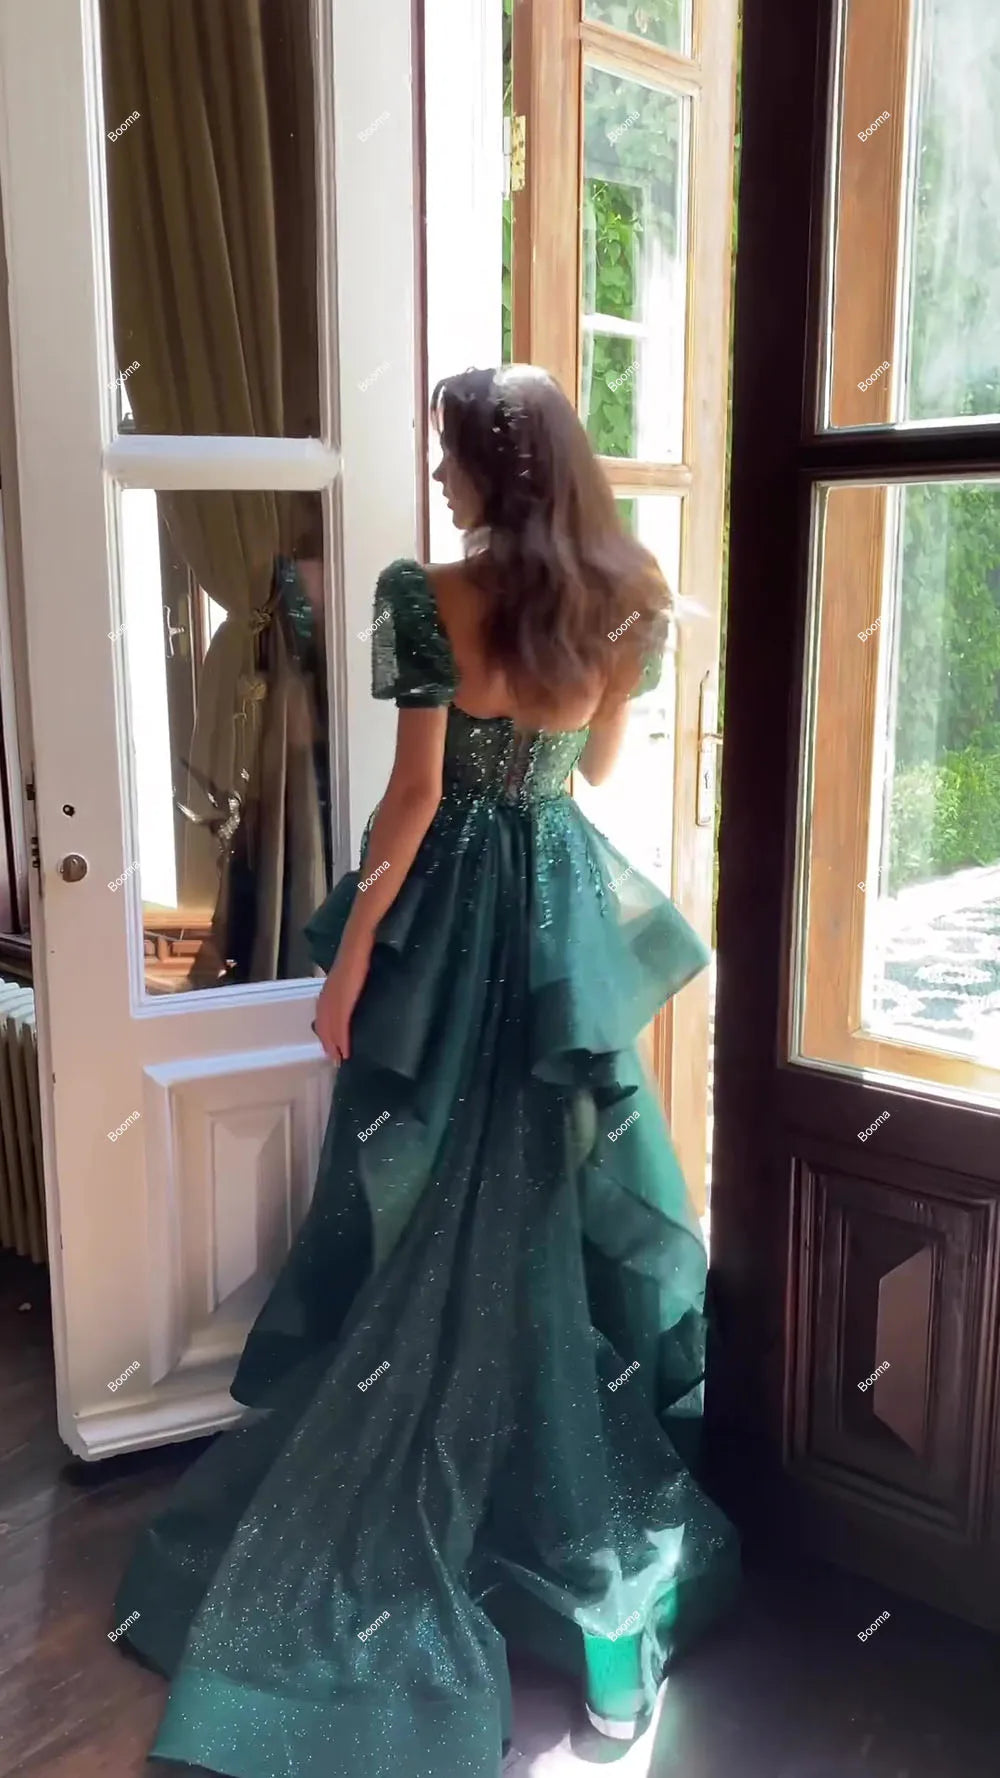 Green A-Line Glitter Wedding Dresses Sweetheart Ruffles Bridals Party Gowns Short Sleeves Formal Brides Dress with Train